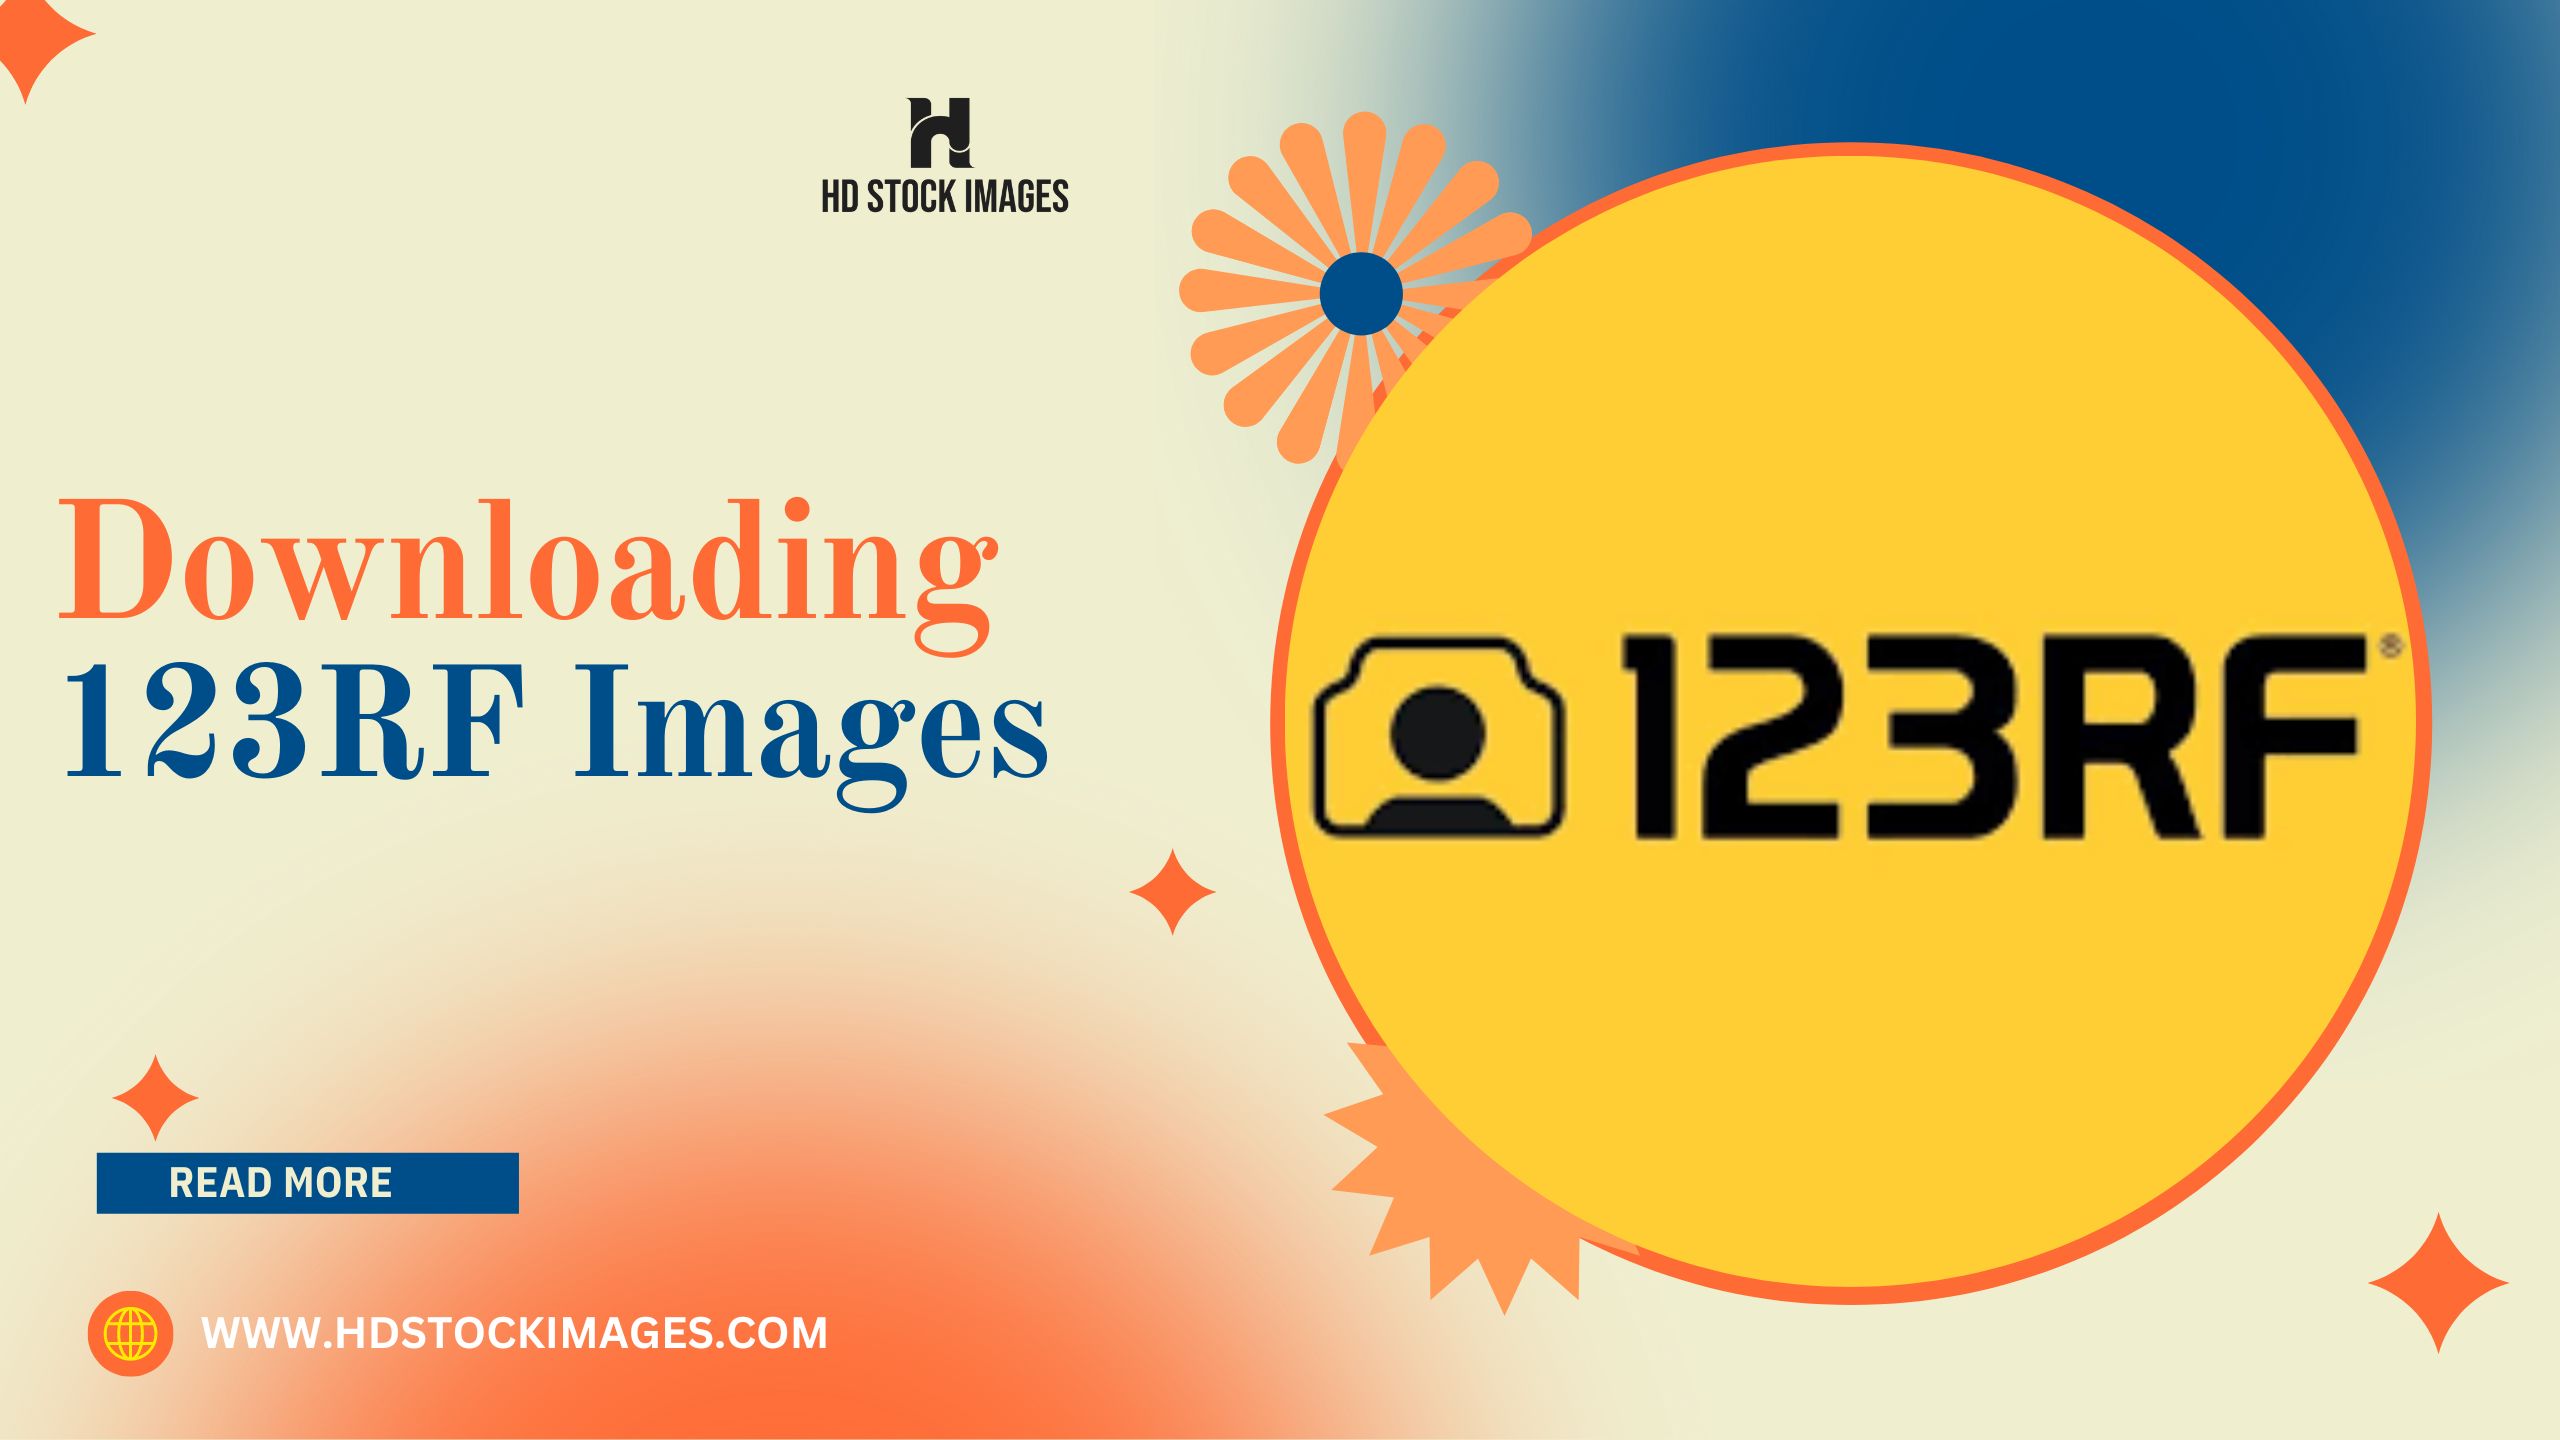 an image of Understanding Copyright and Licensing: Downloading 123RF Images